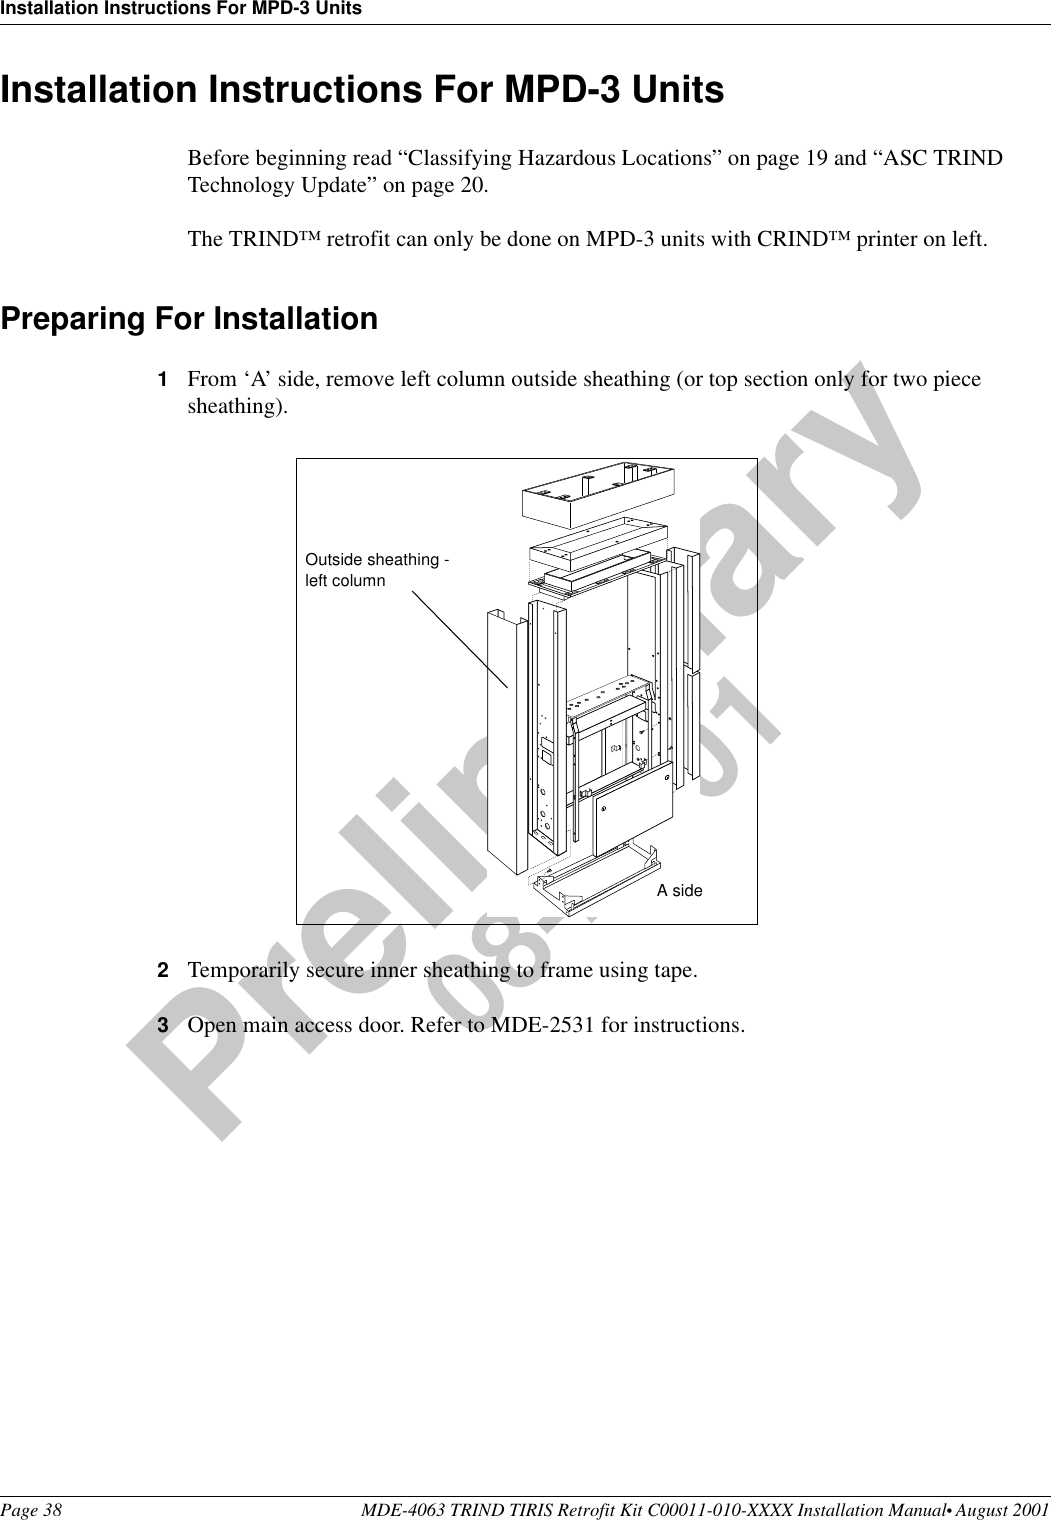 Installation Instructions For MPD-3 UnitsPage 38 MDE-4063 TRIND TIRIS Retrofit Kit C00011-010-XXXX Installation Manual• August 2001Preliminary08-24-01Installation Instructions For MPD-3 UnitsBefore beginning read “Classifying Hazardous Locations” on page 19 and “ASC TRIND Technology Update” on page 20.The TRIND™ retrofit can only be done on MPD-3 units with CRIND™ printer on left.Preparing For Installation1From ‘A’ side, remove left column outside sheathing (or top section only for two piece sheathing).2Temporarily secure inner sheathing to frame using tape. 3Open main access door. Refer to MDE-2531 for instructions.Outside sheathing - left columnA side